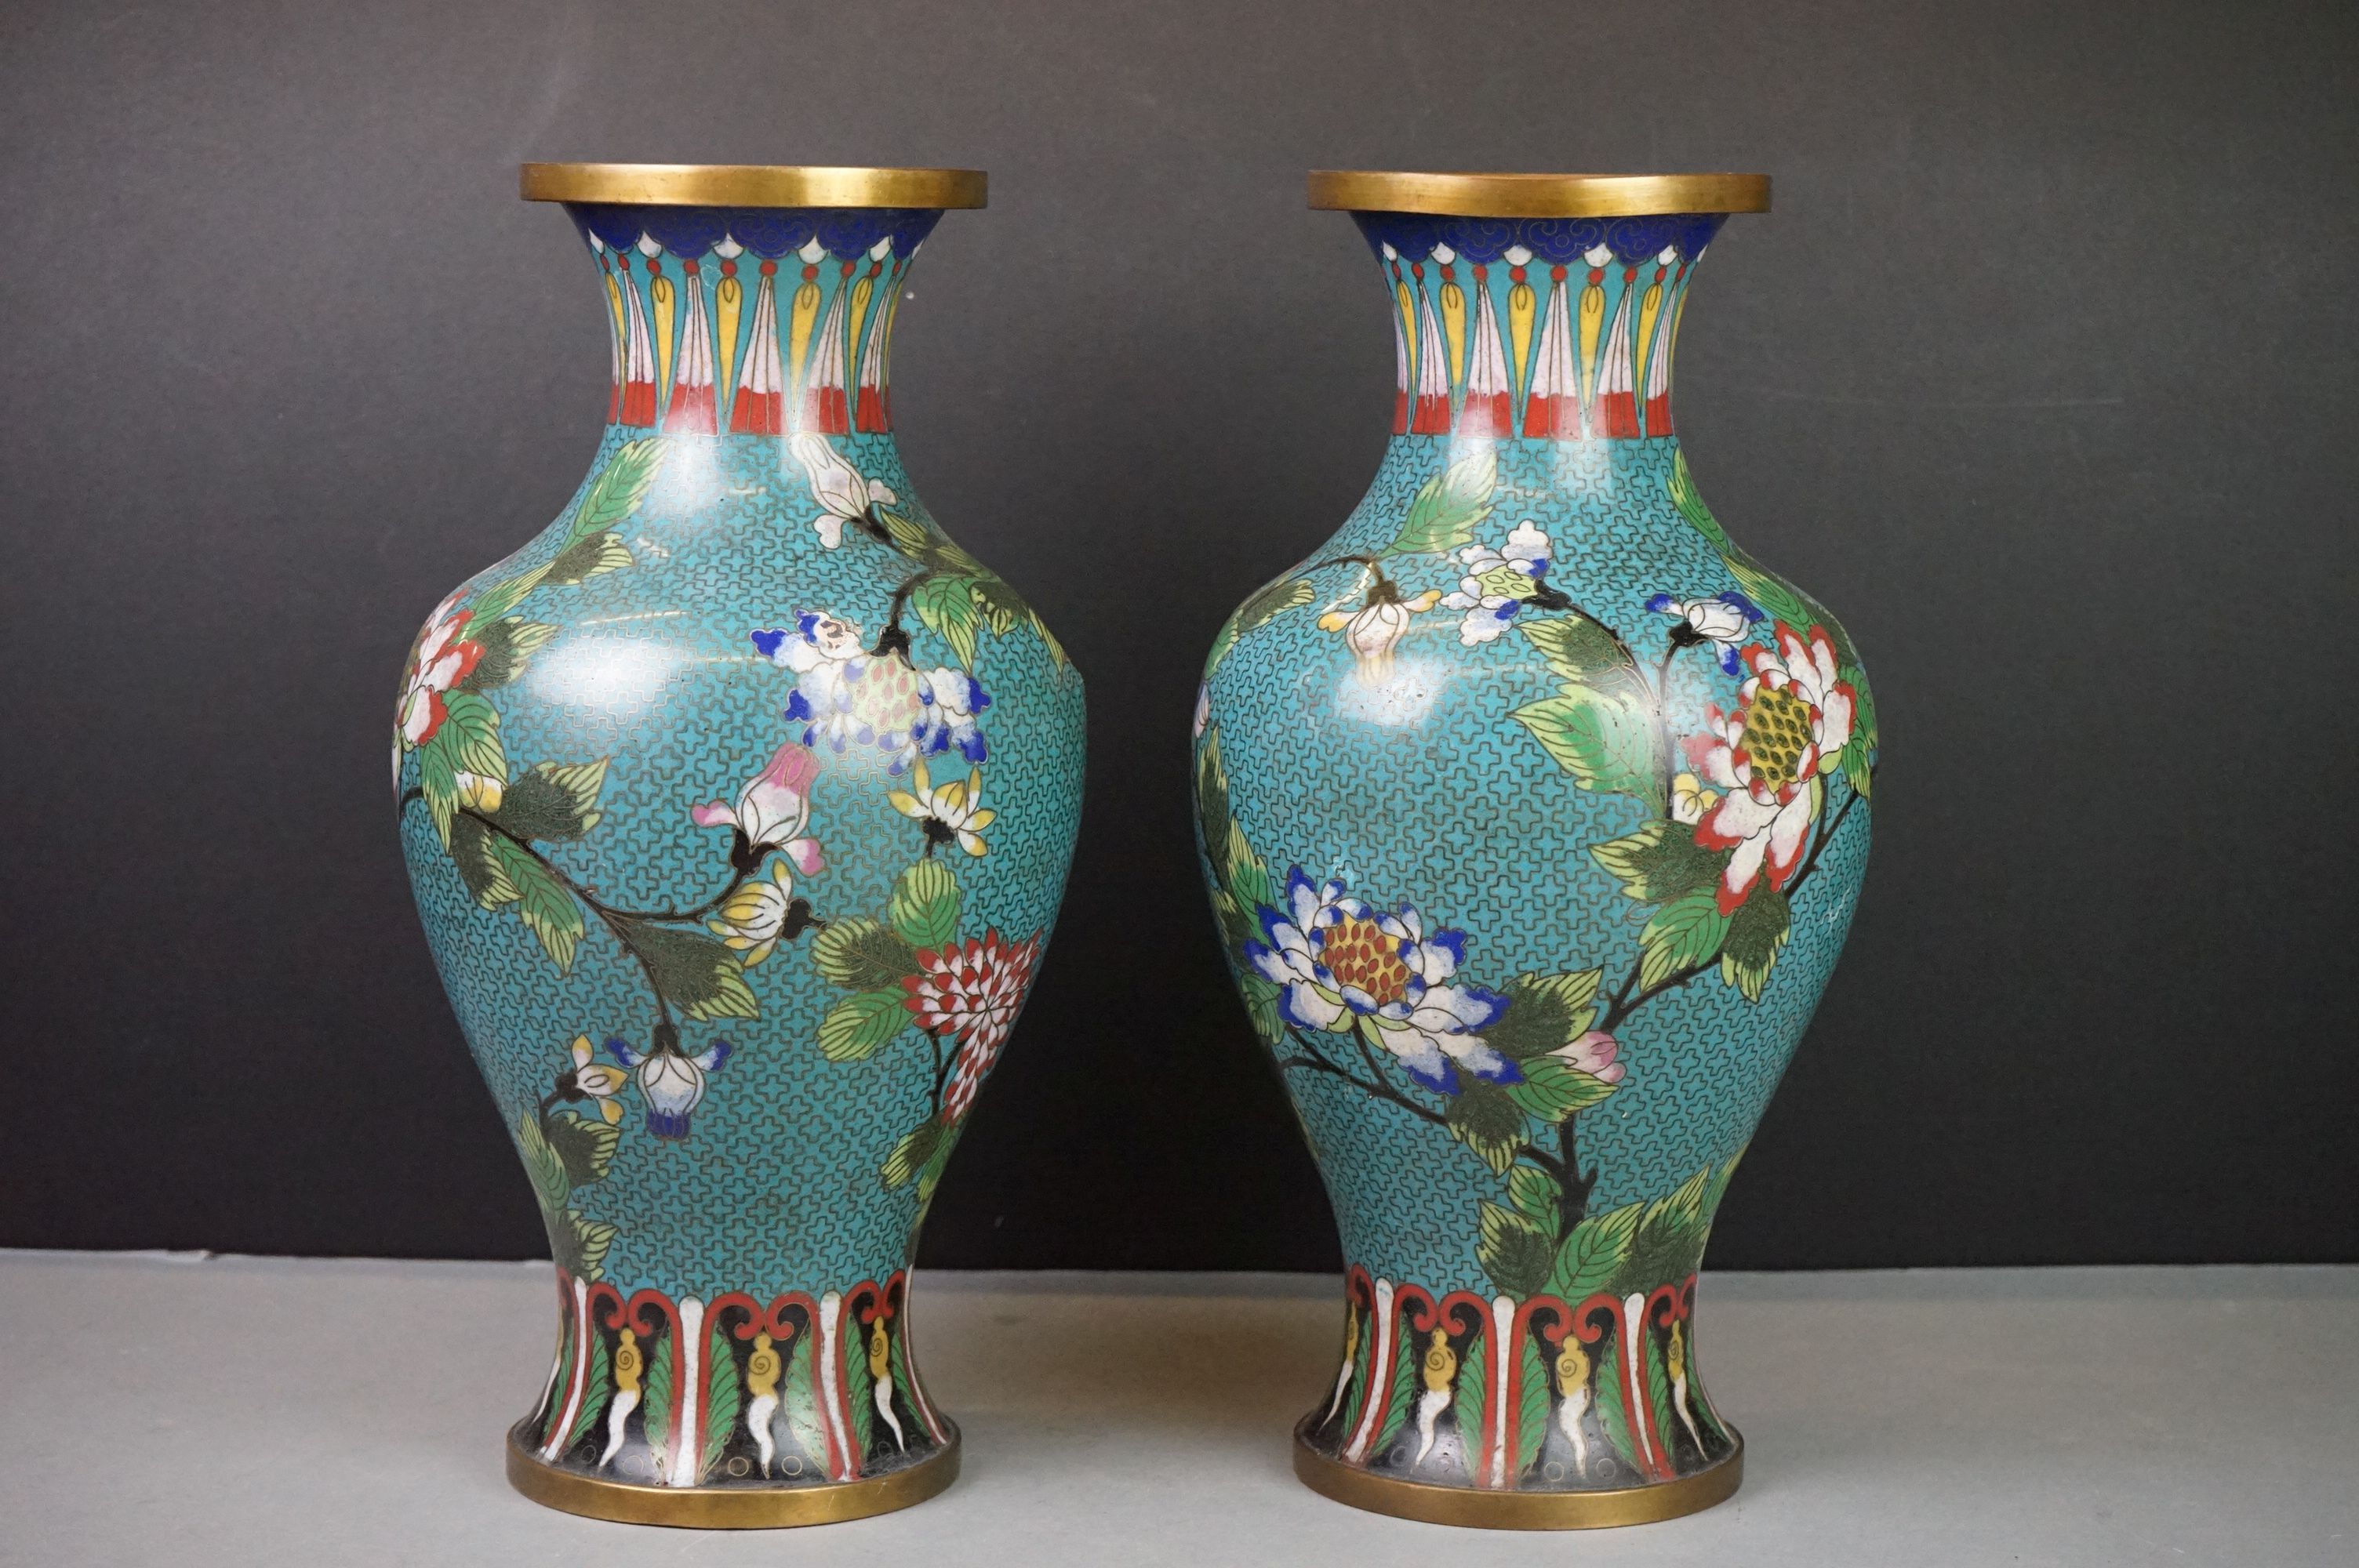 Pair of Chinese Cloisonne Vases decorated with flowers on a turquoise ground, 32cm high